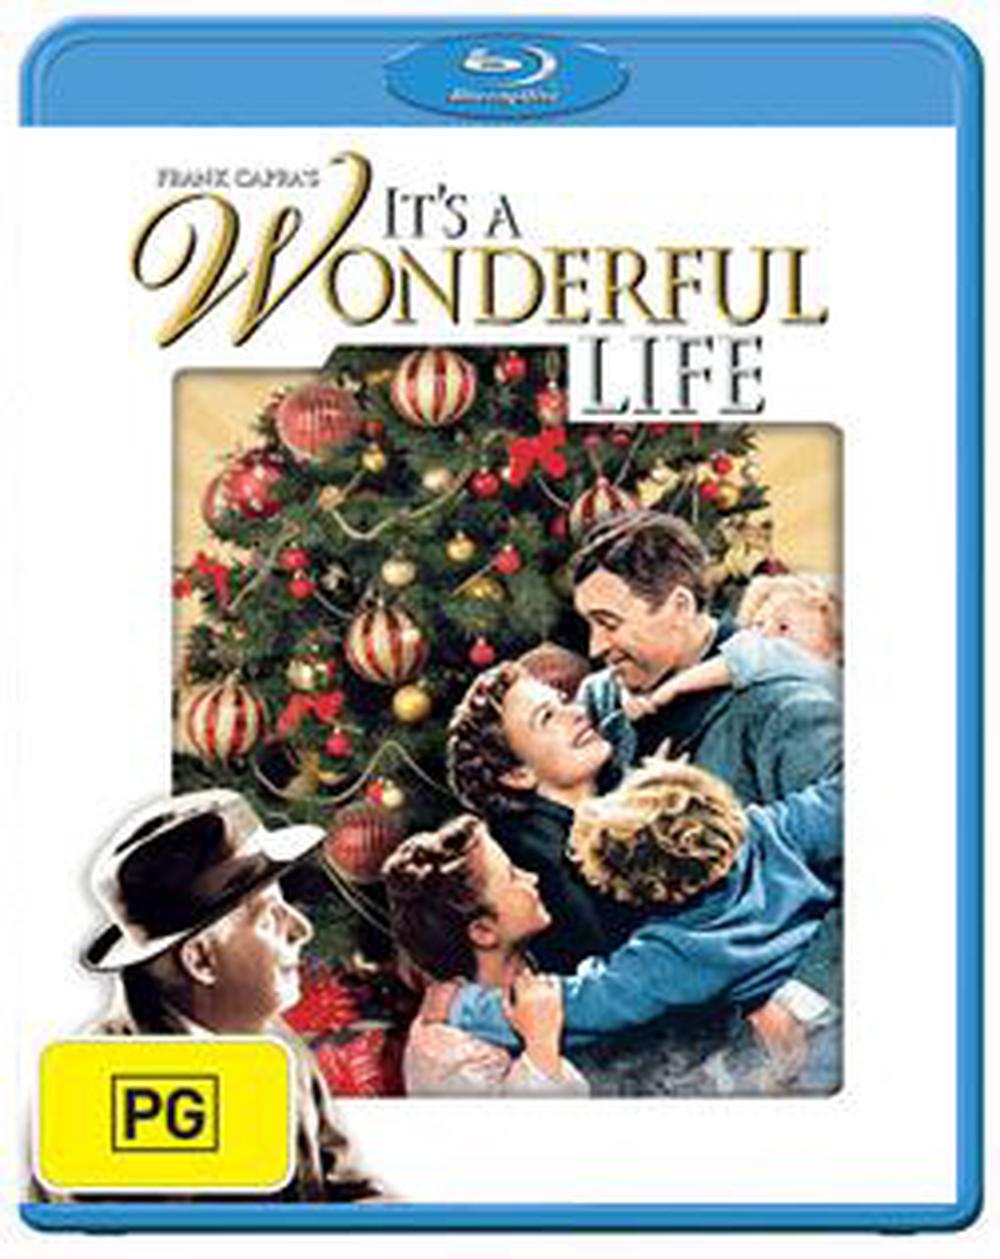 Its A Wonderful Life (Jb), Blu-ray | Buy online at The Nile